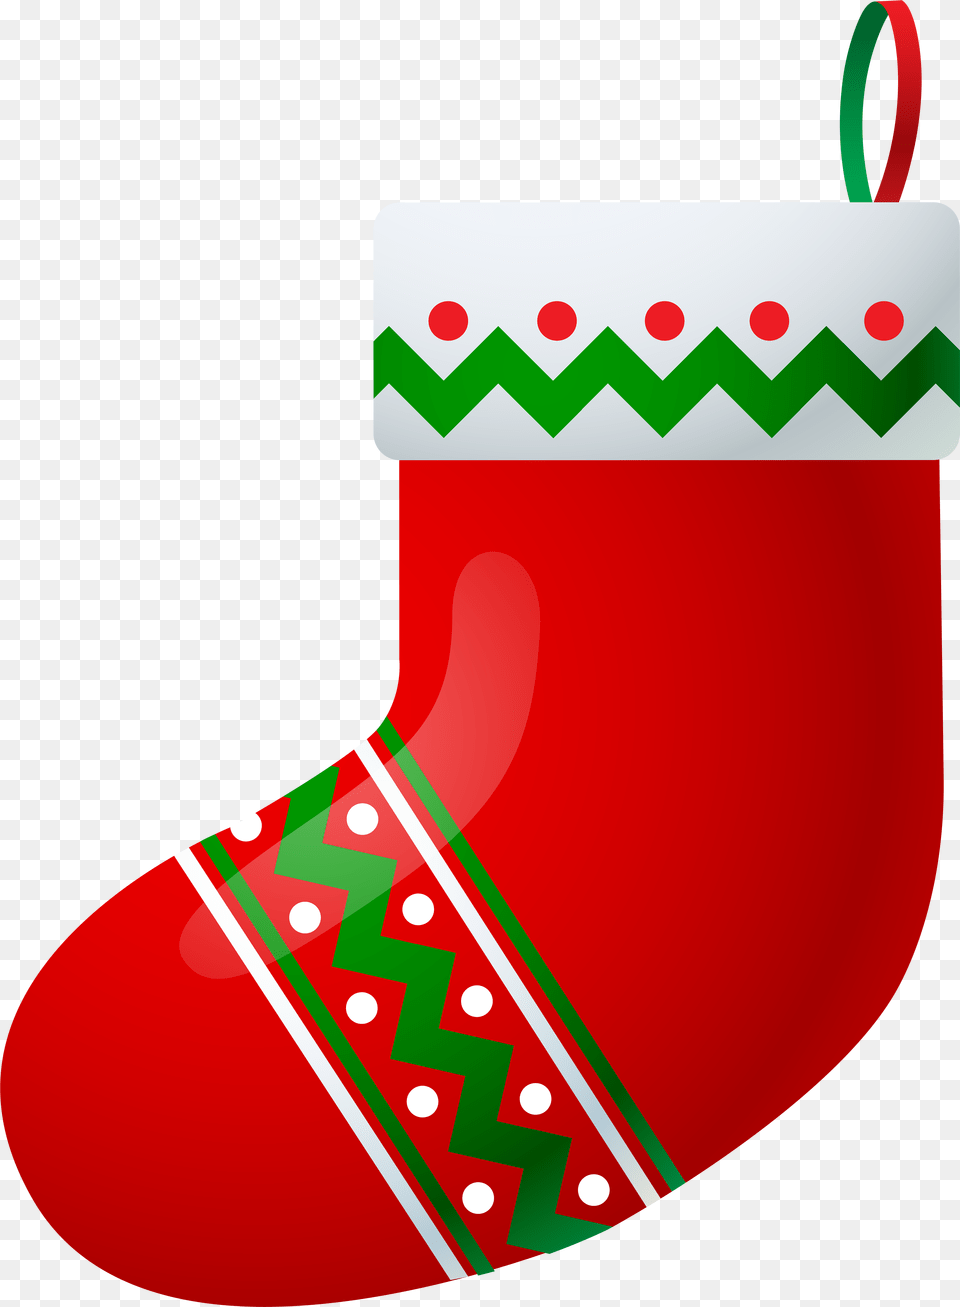 Free Download Clip Clip Art Christmas Socks, Stocking, Hosiery, Clothing, Gift Png Image